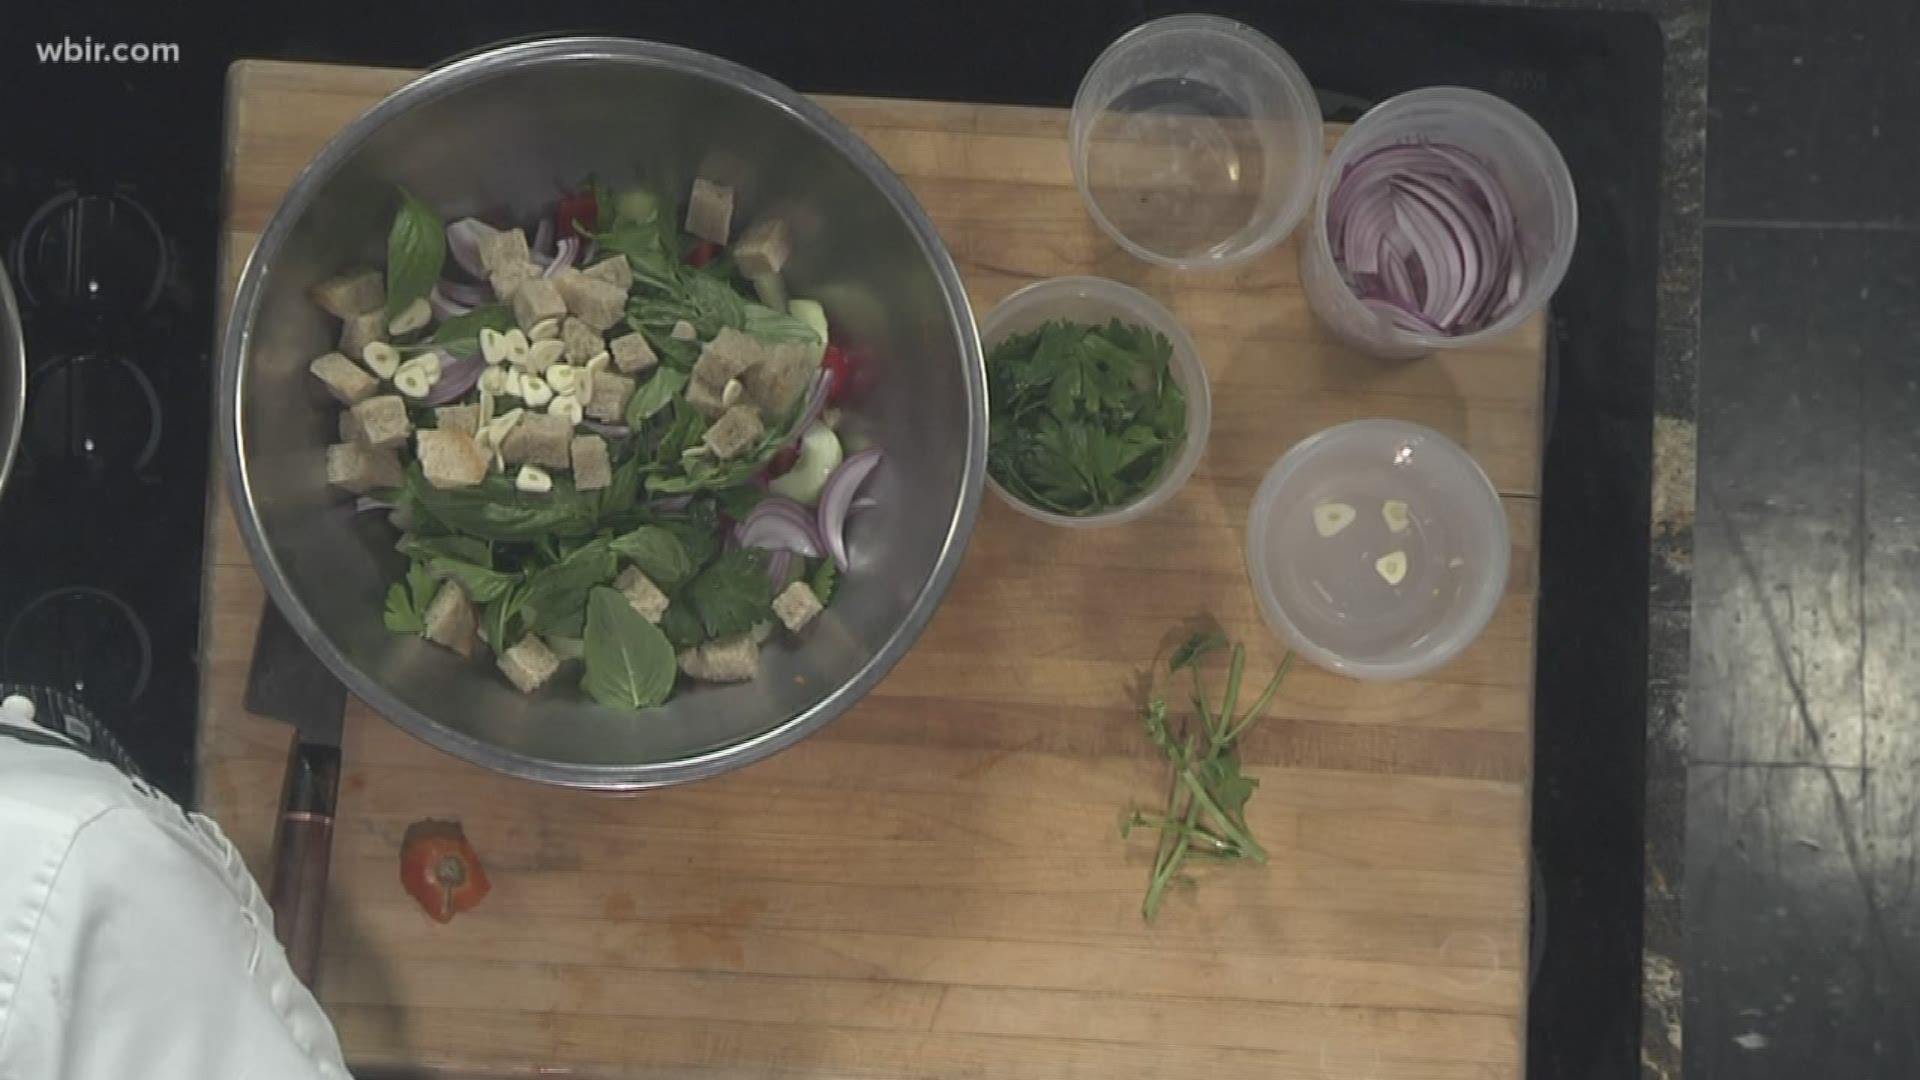 Chef Trevor Stockton from RT Lodge shows us how to make heirloom tomato gazpacho.